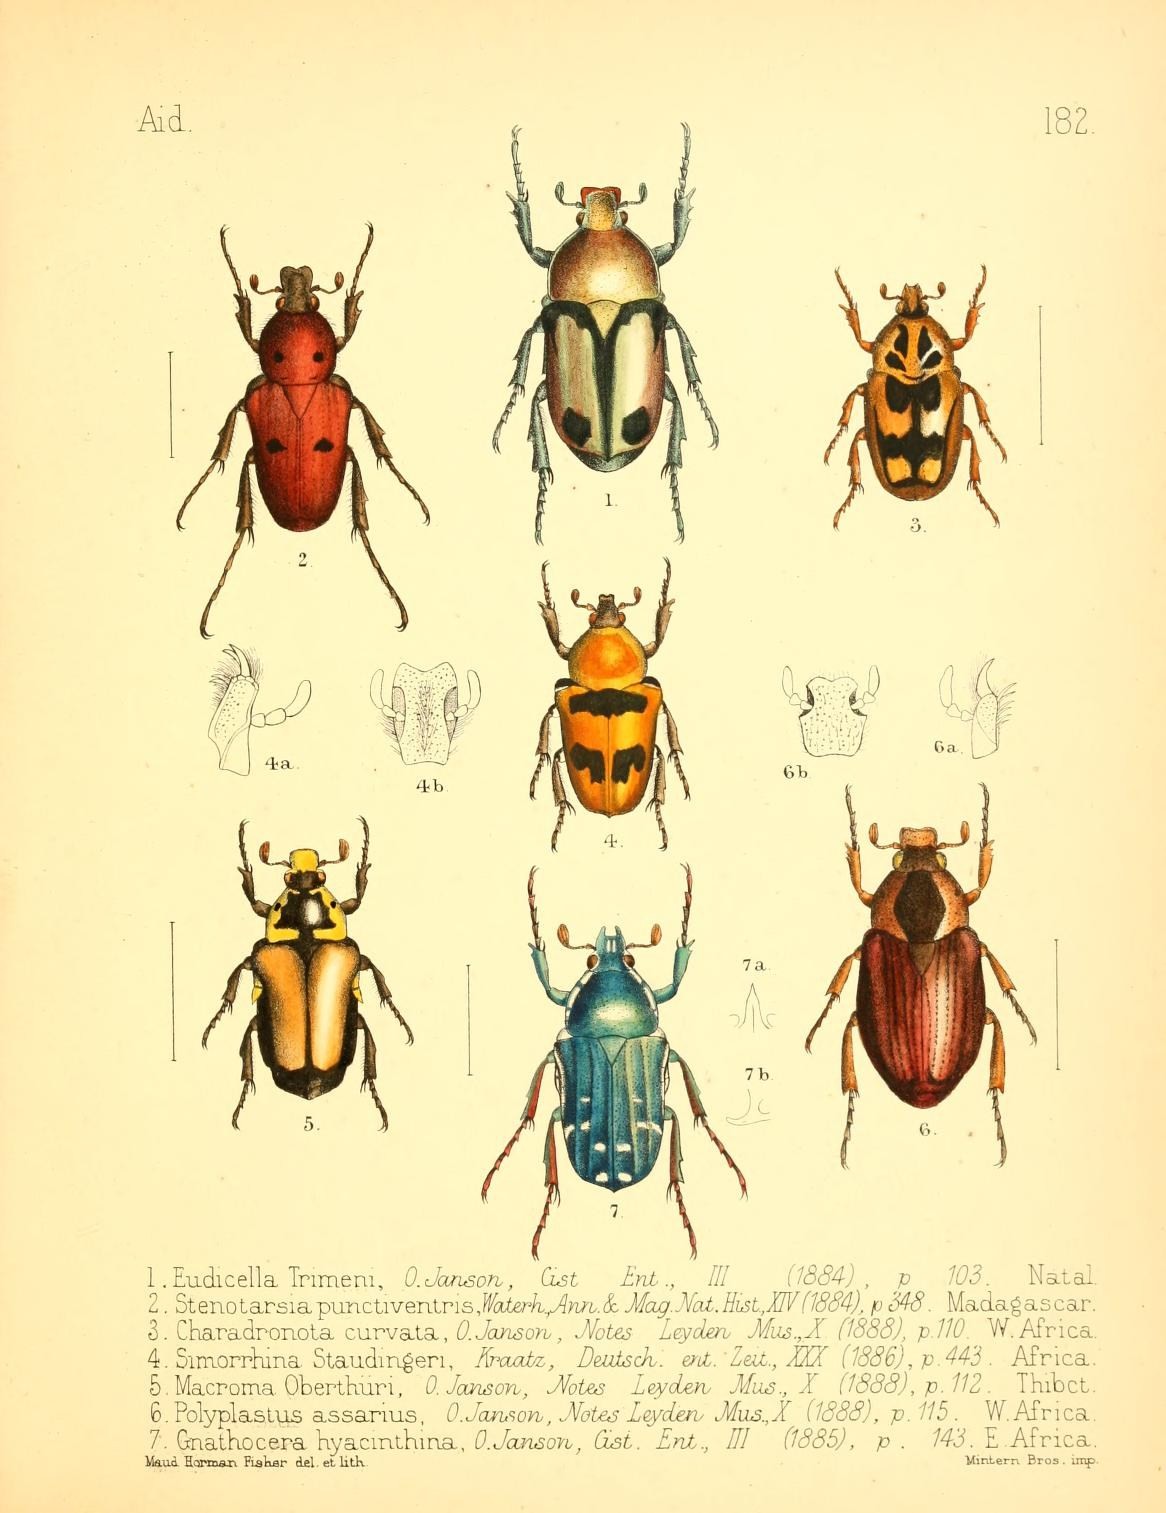 A scientific image illustrating a diagram of a collection of various spiders.